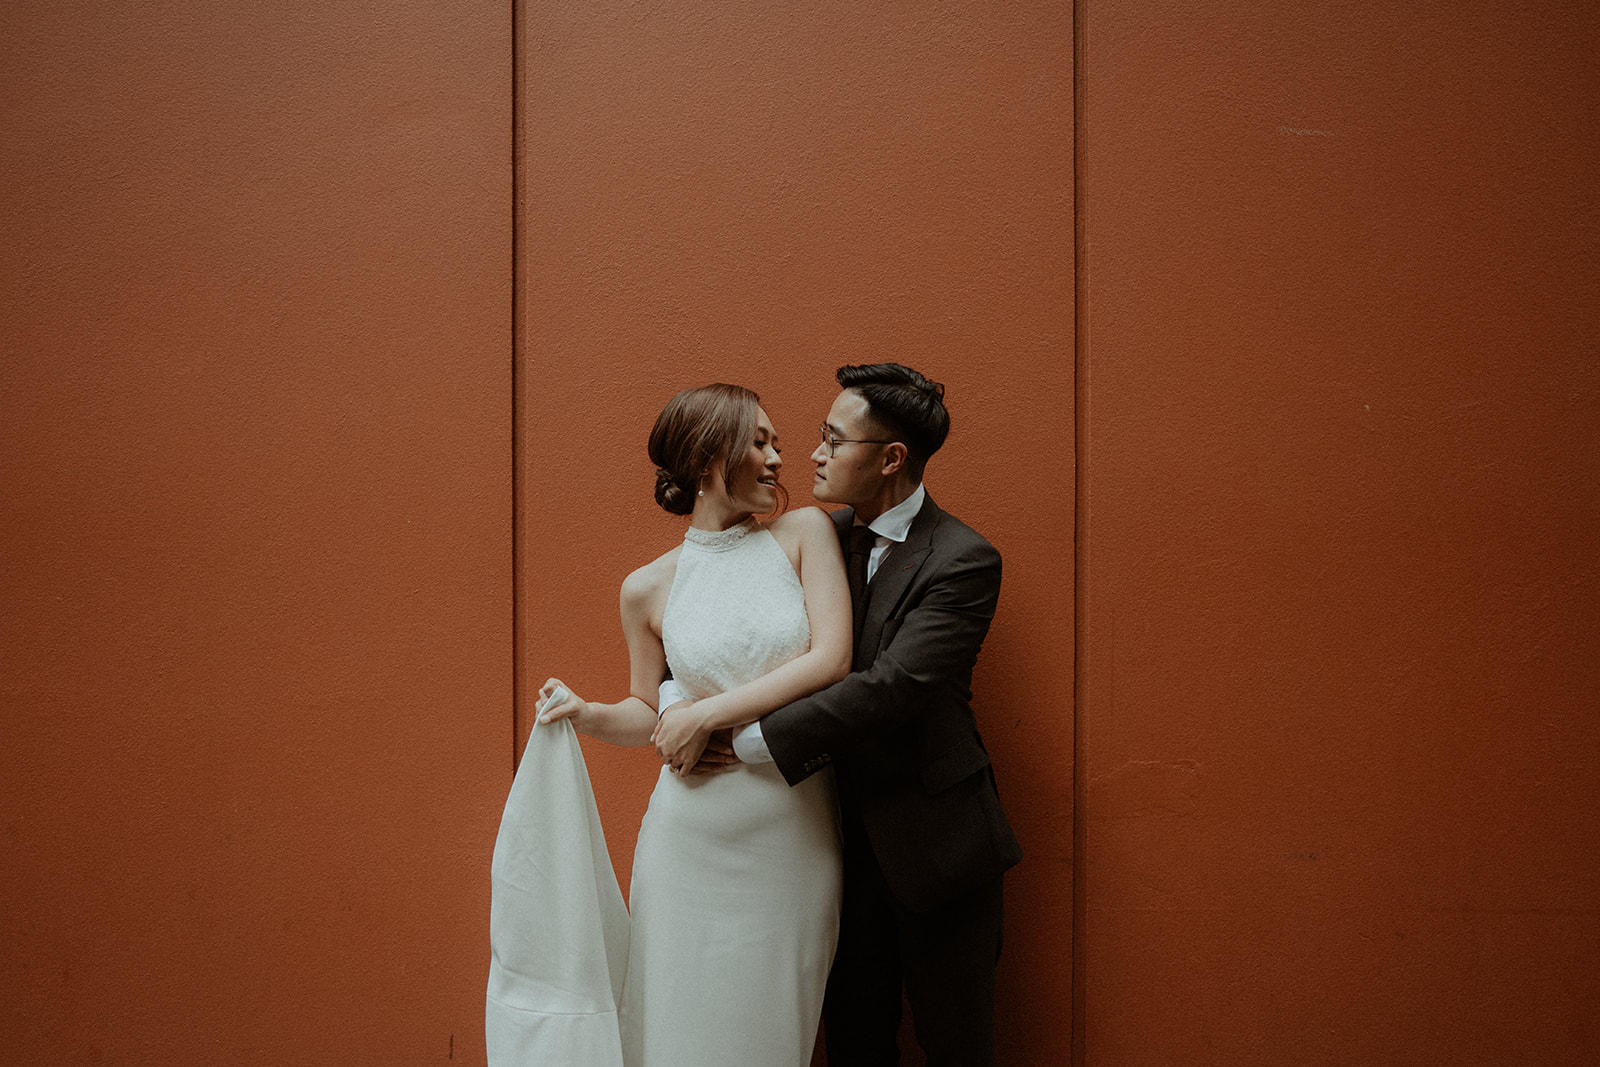 Bride and groom, hugging up against an orange wall